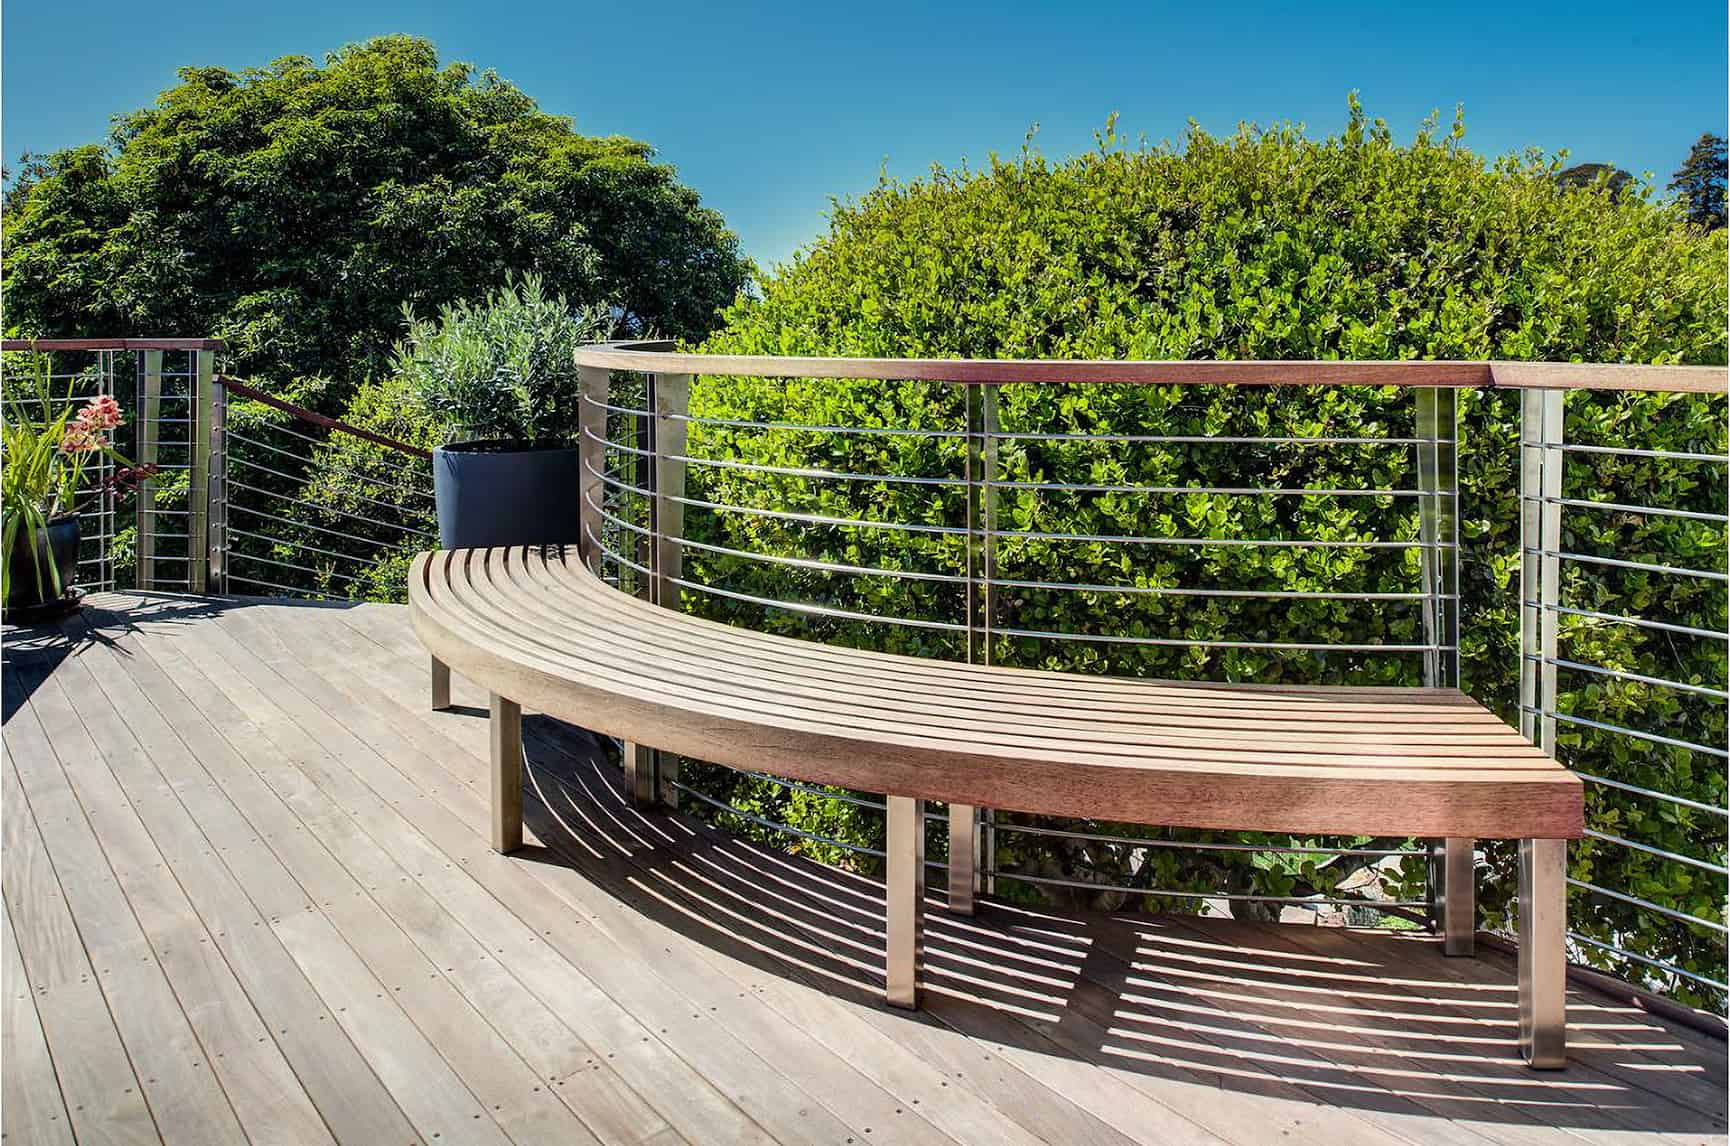 Curved bench and metal railing on elevated deck.